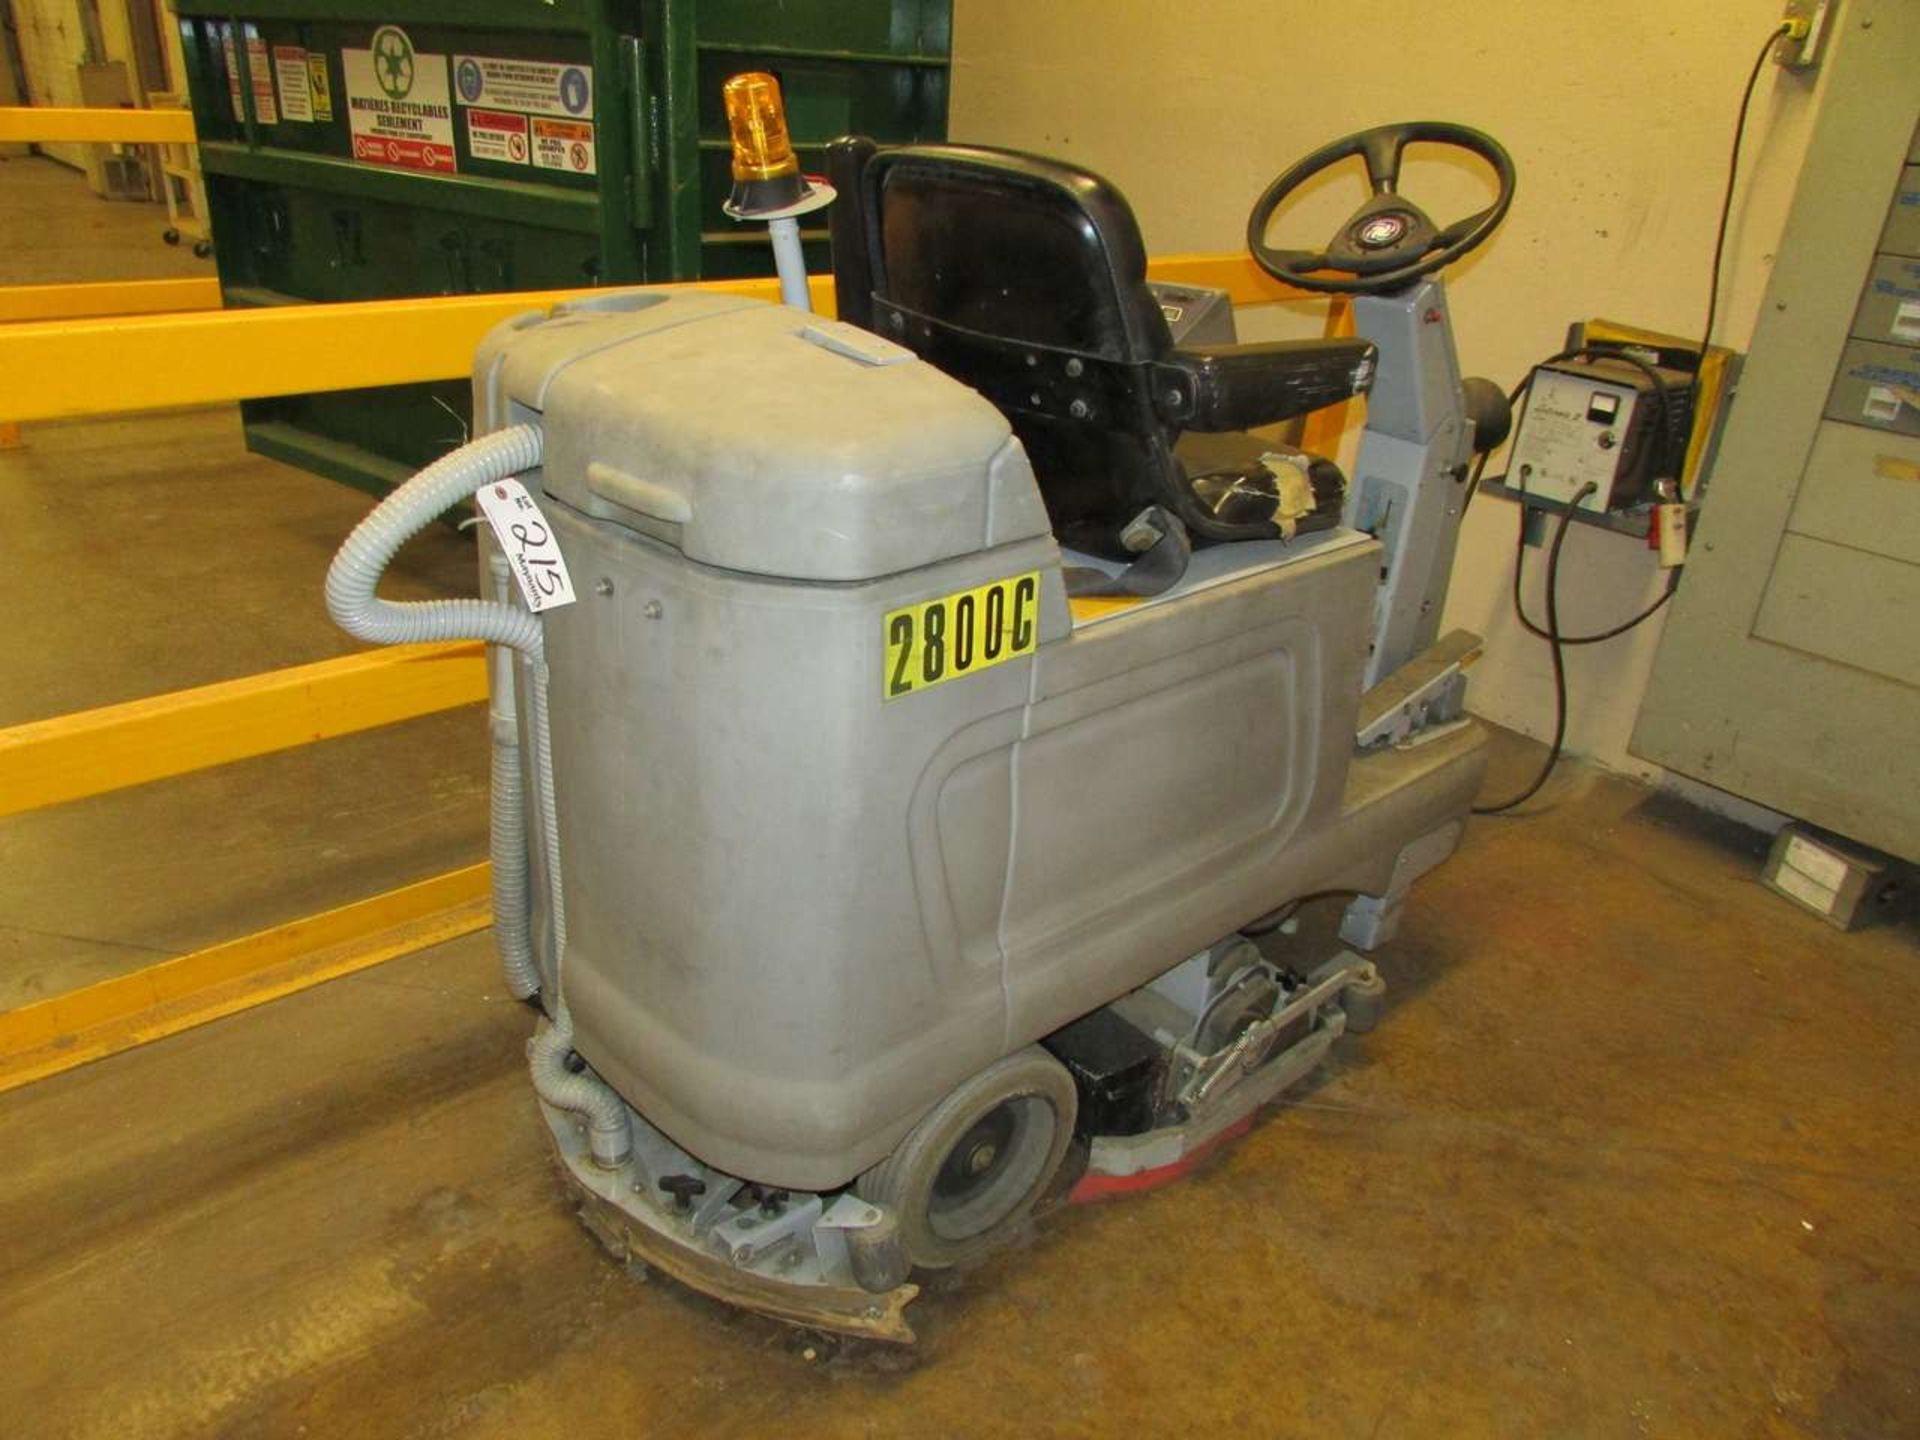 2001 Advance HR-2800C Electric Floor Scrubber - Image 2 of 6